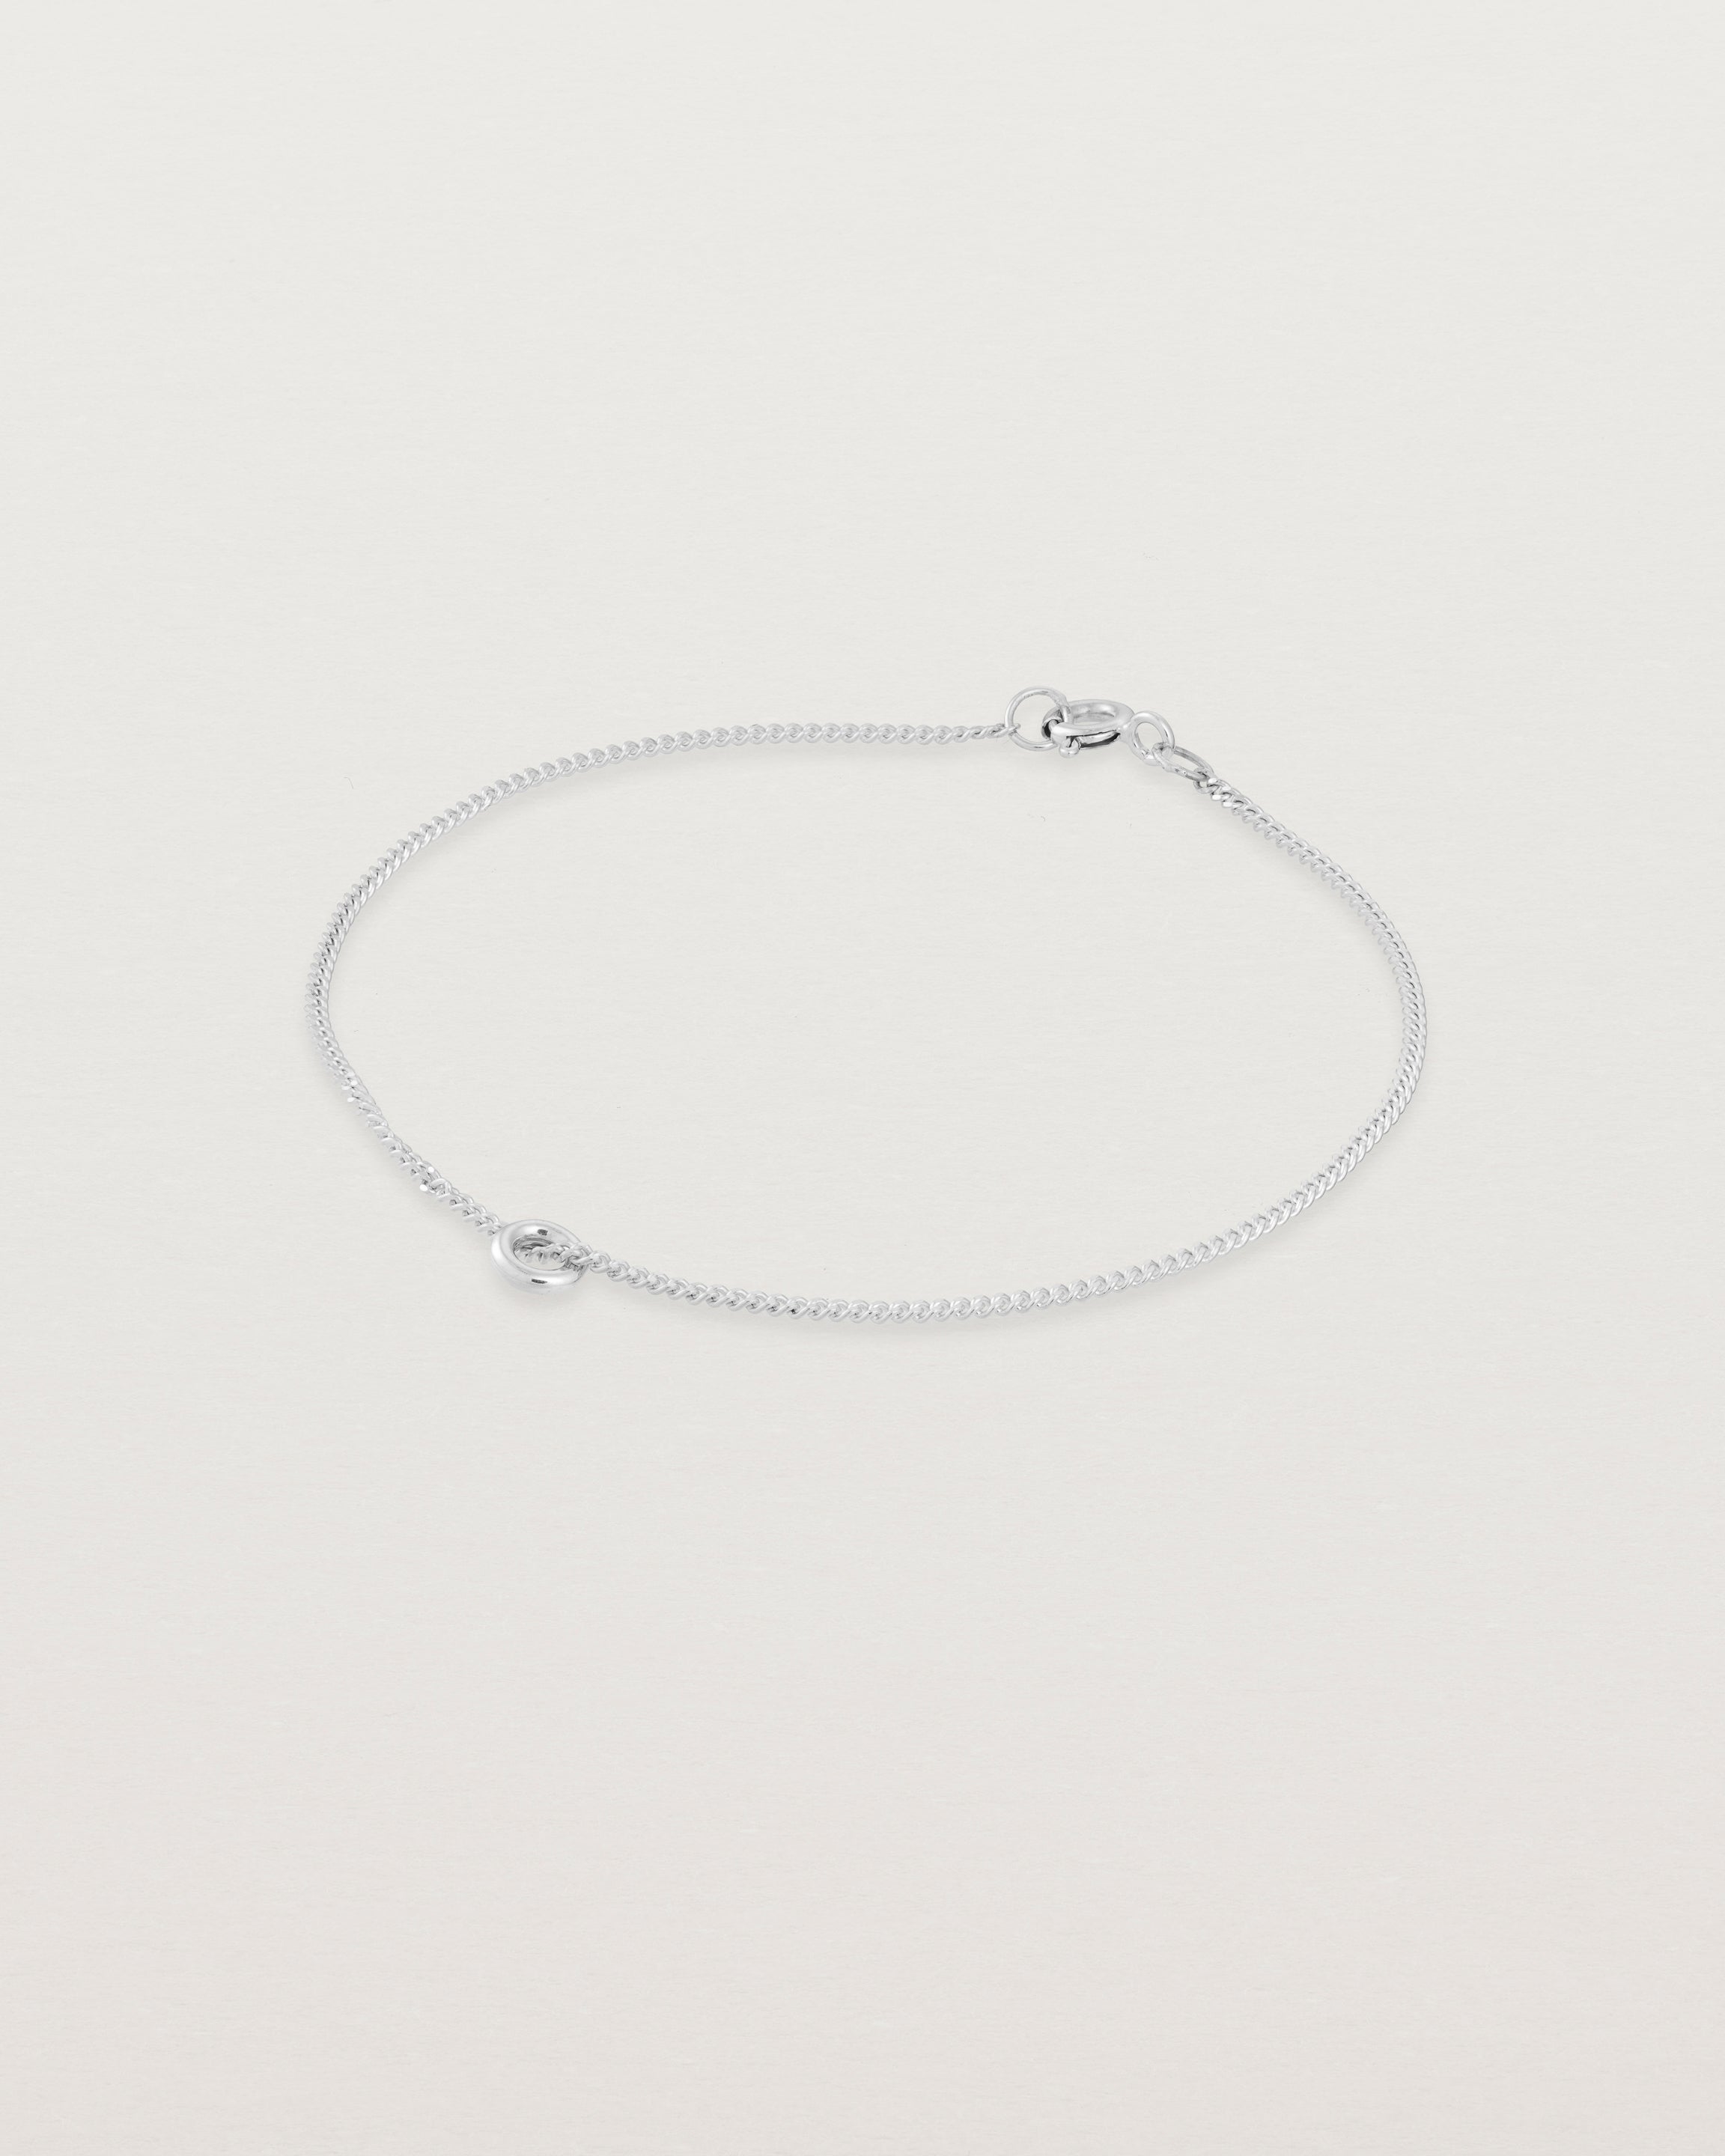 Side view of the Aether Bracelet showing one round charm in sterling silver